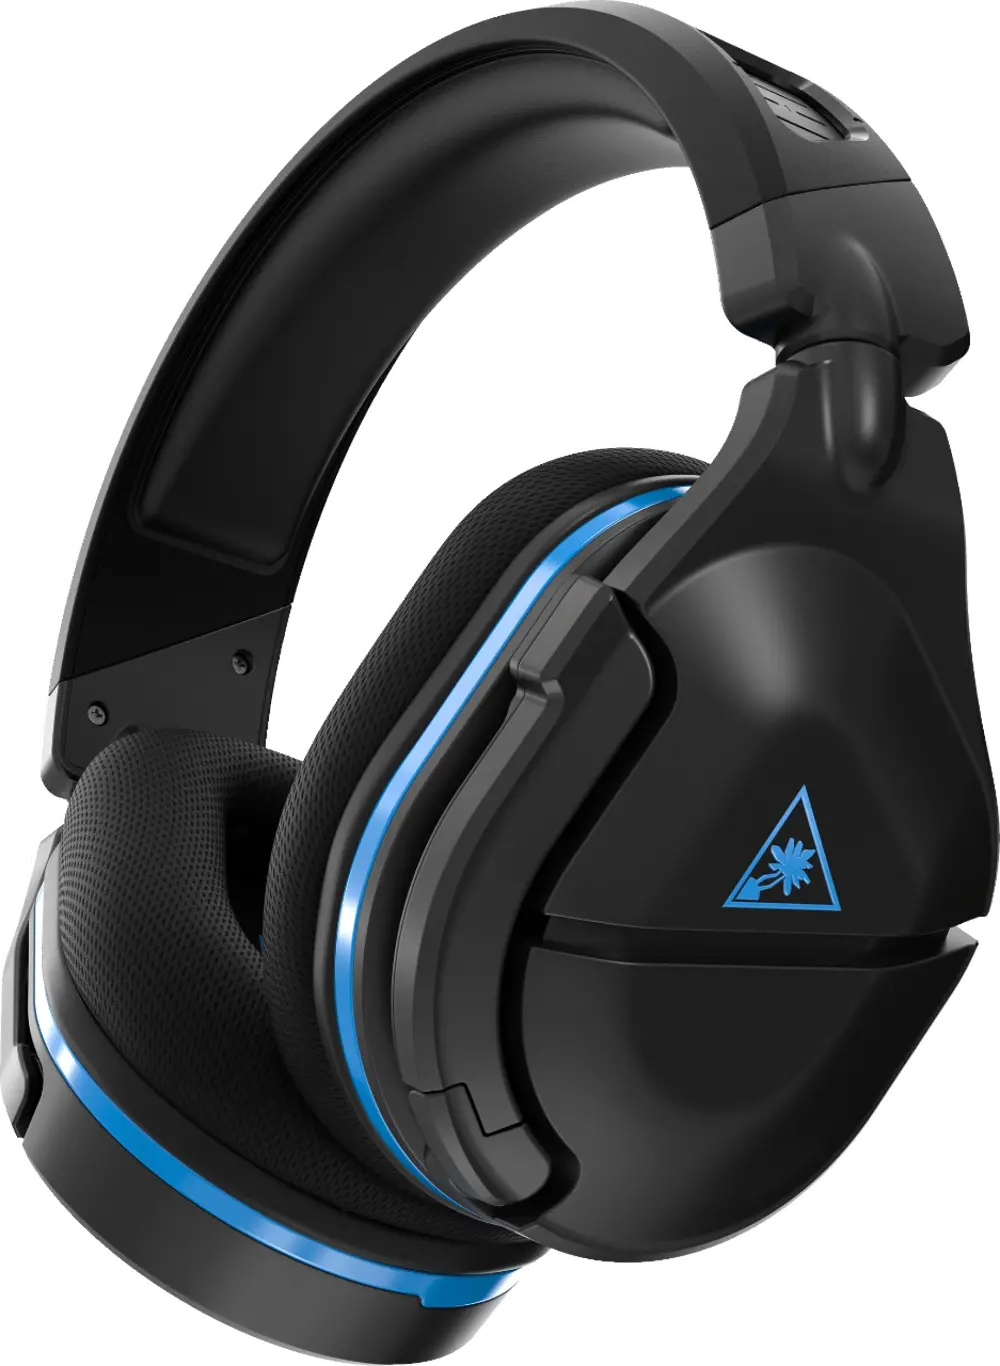 TBS-3140-01 Turtle Beach Stealth 600 Gen 2 Black Wireless Gaming Headset - PS4, PS5-1